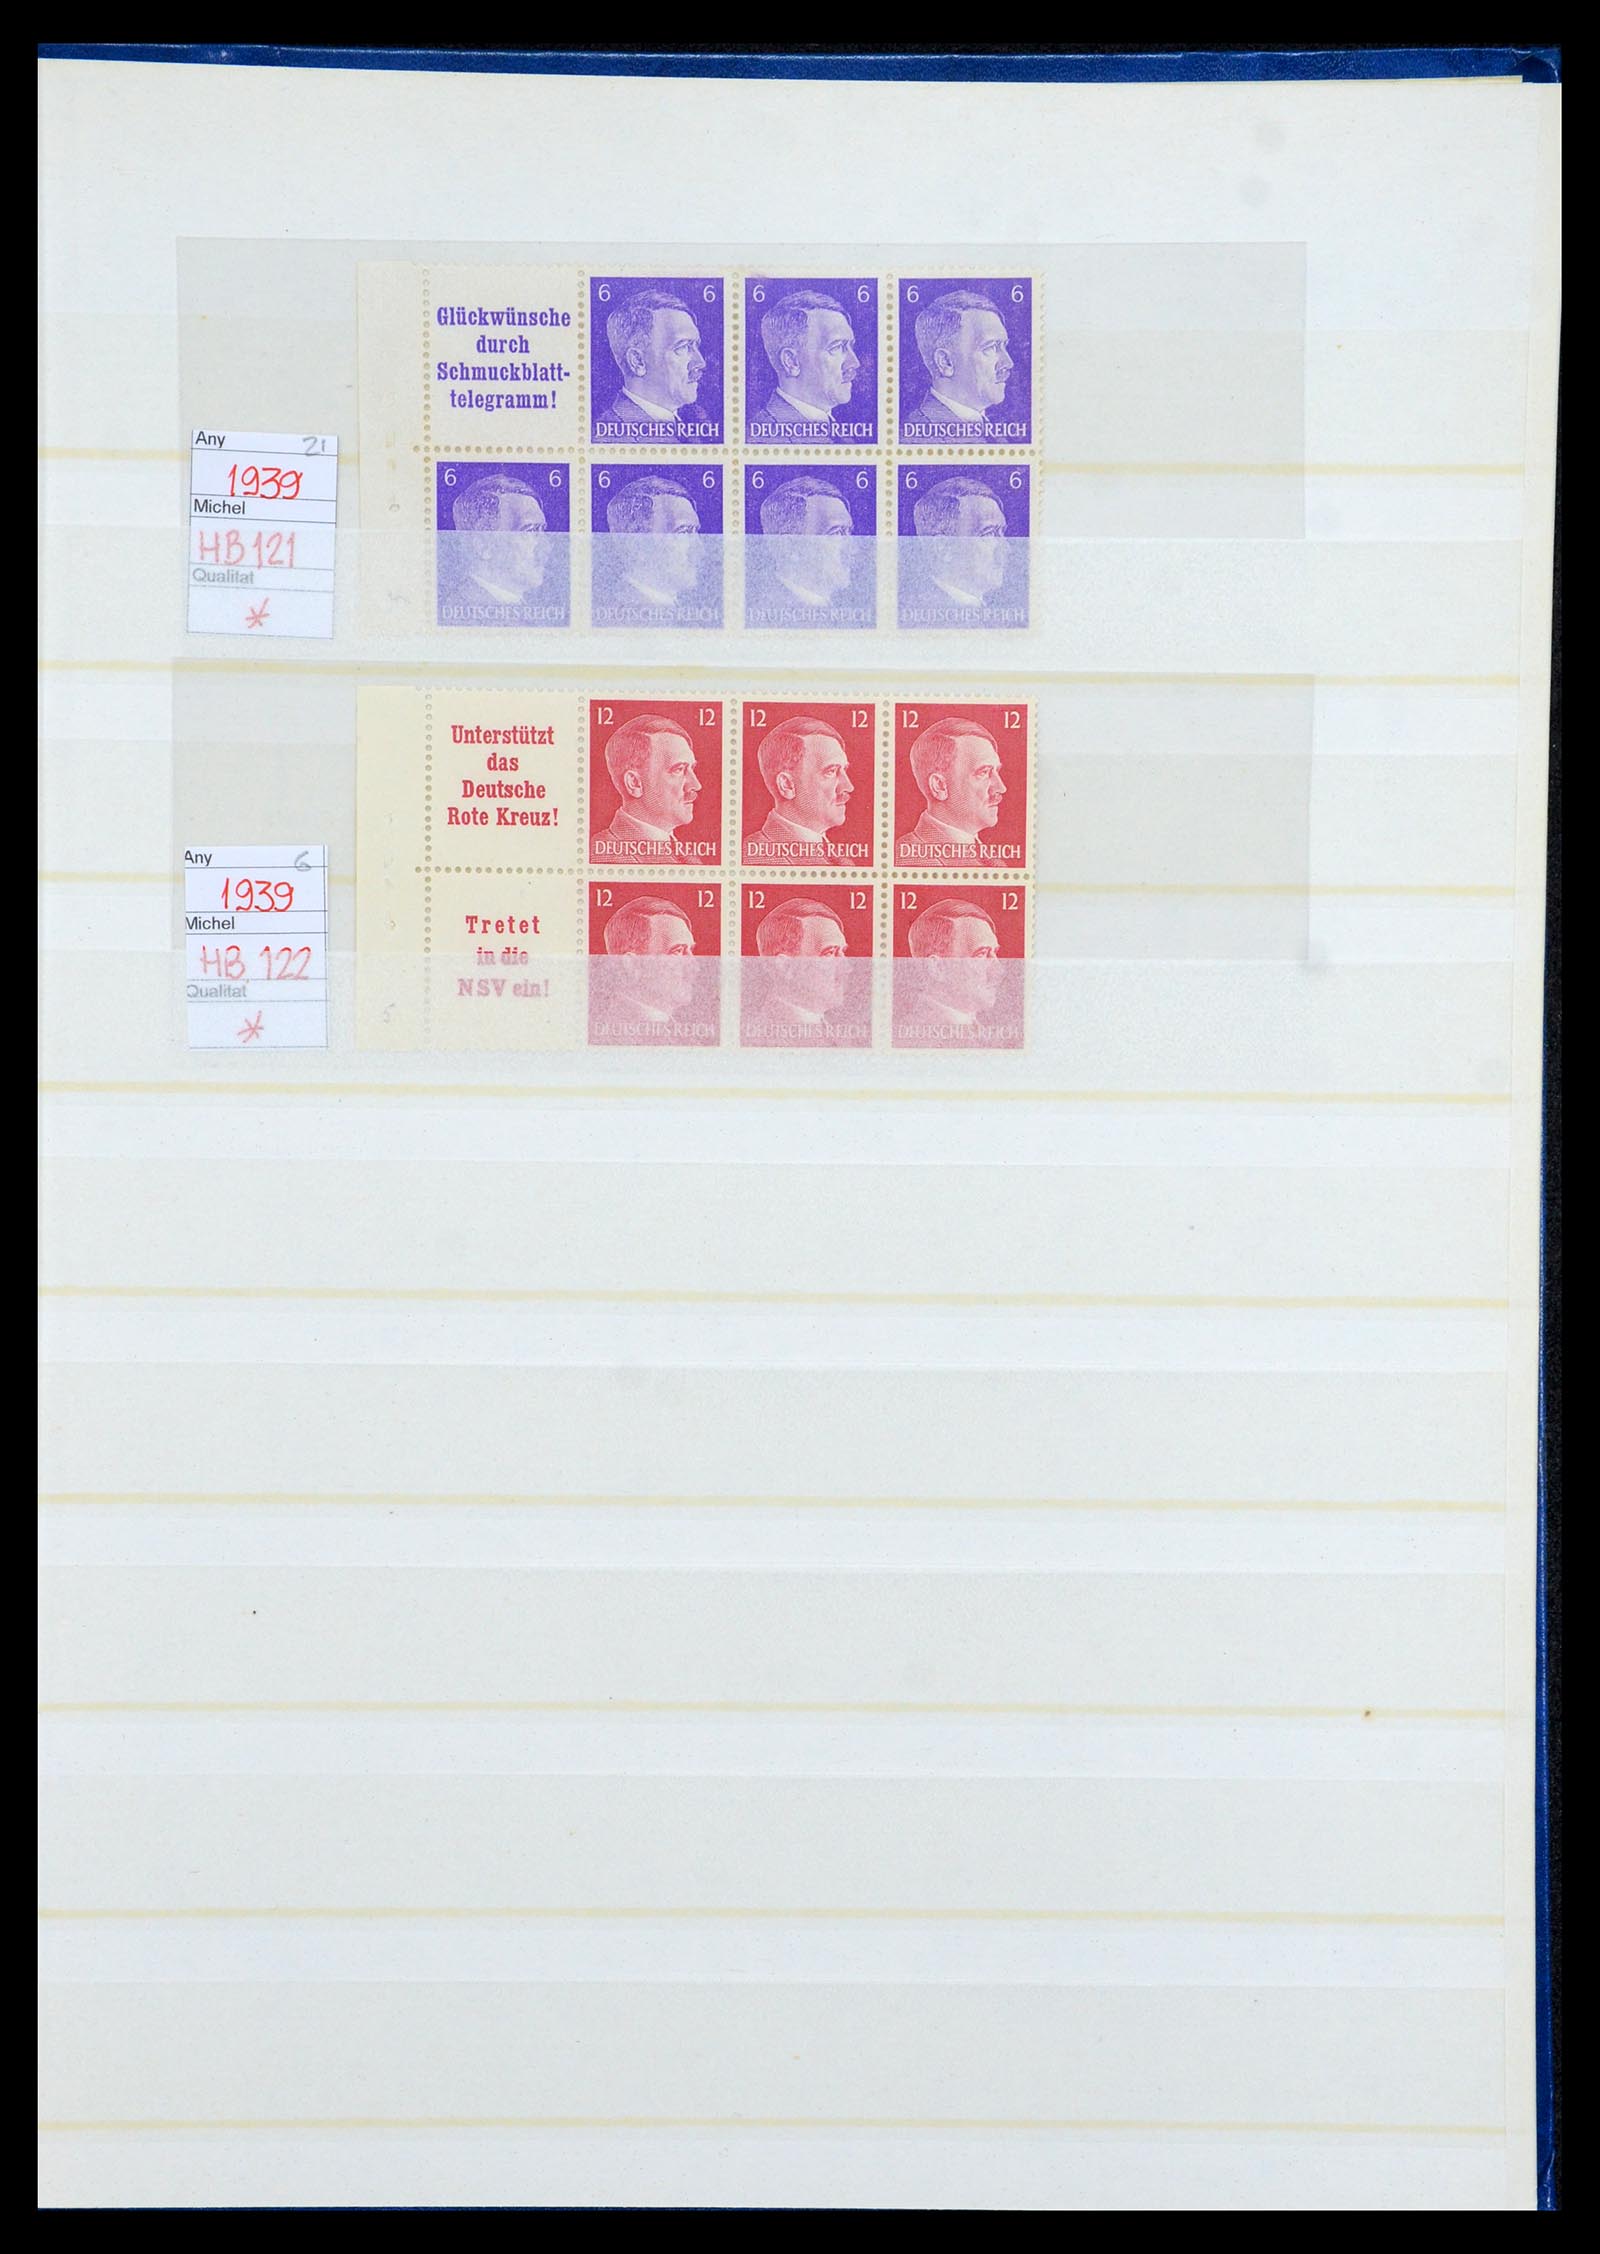 35875 017 - Stamp Collection 35875 German Reich booklet panes 1927-1939.